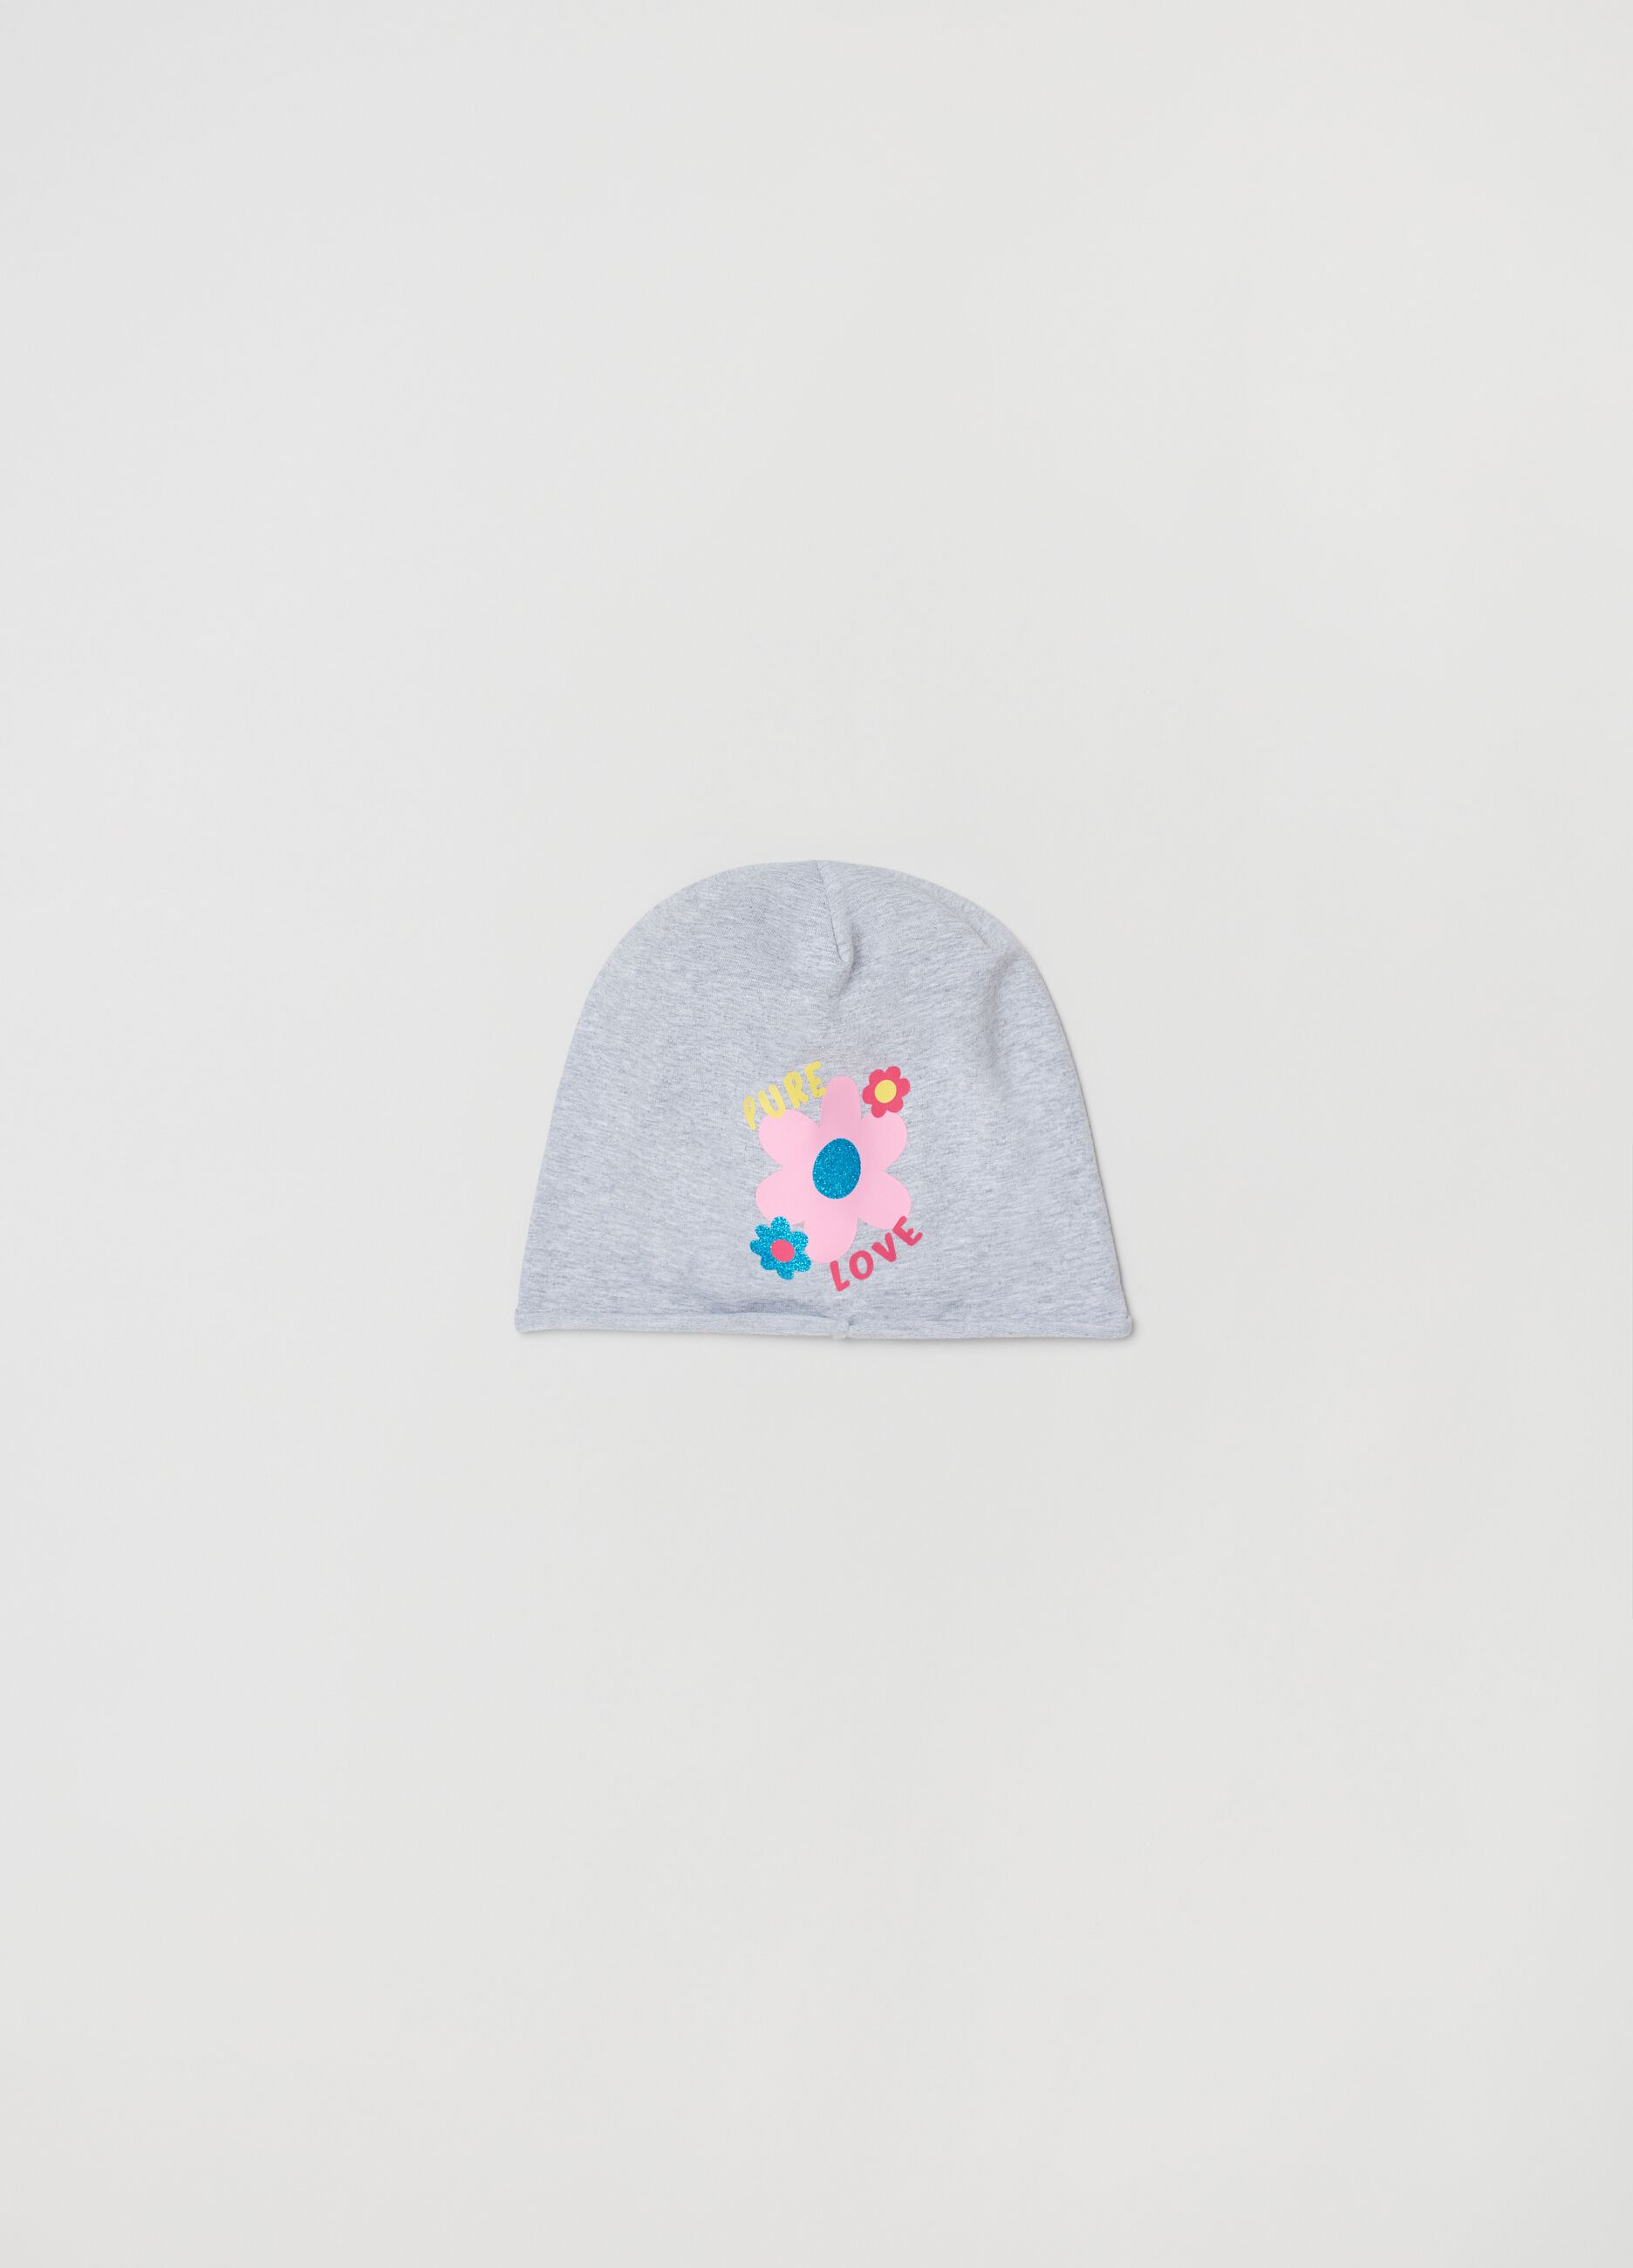 Jersey hat with glitter and print.